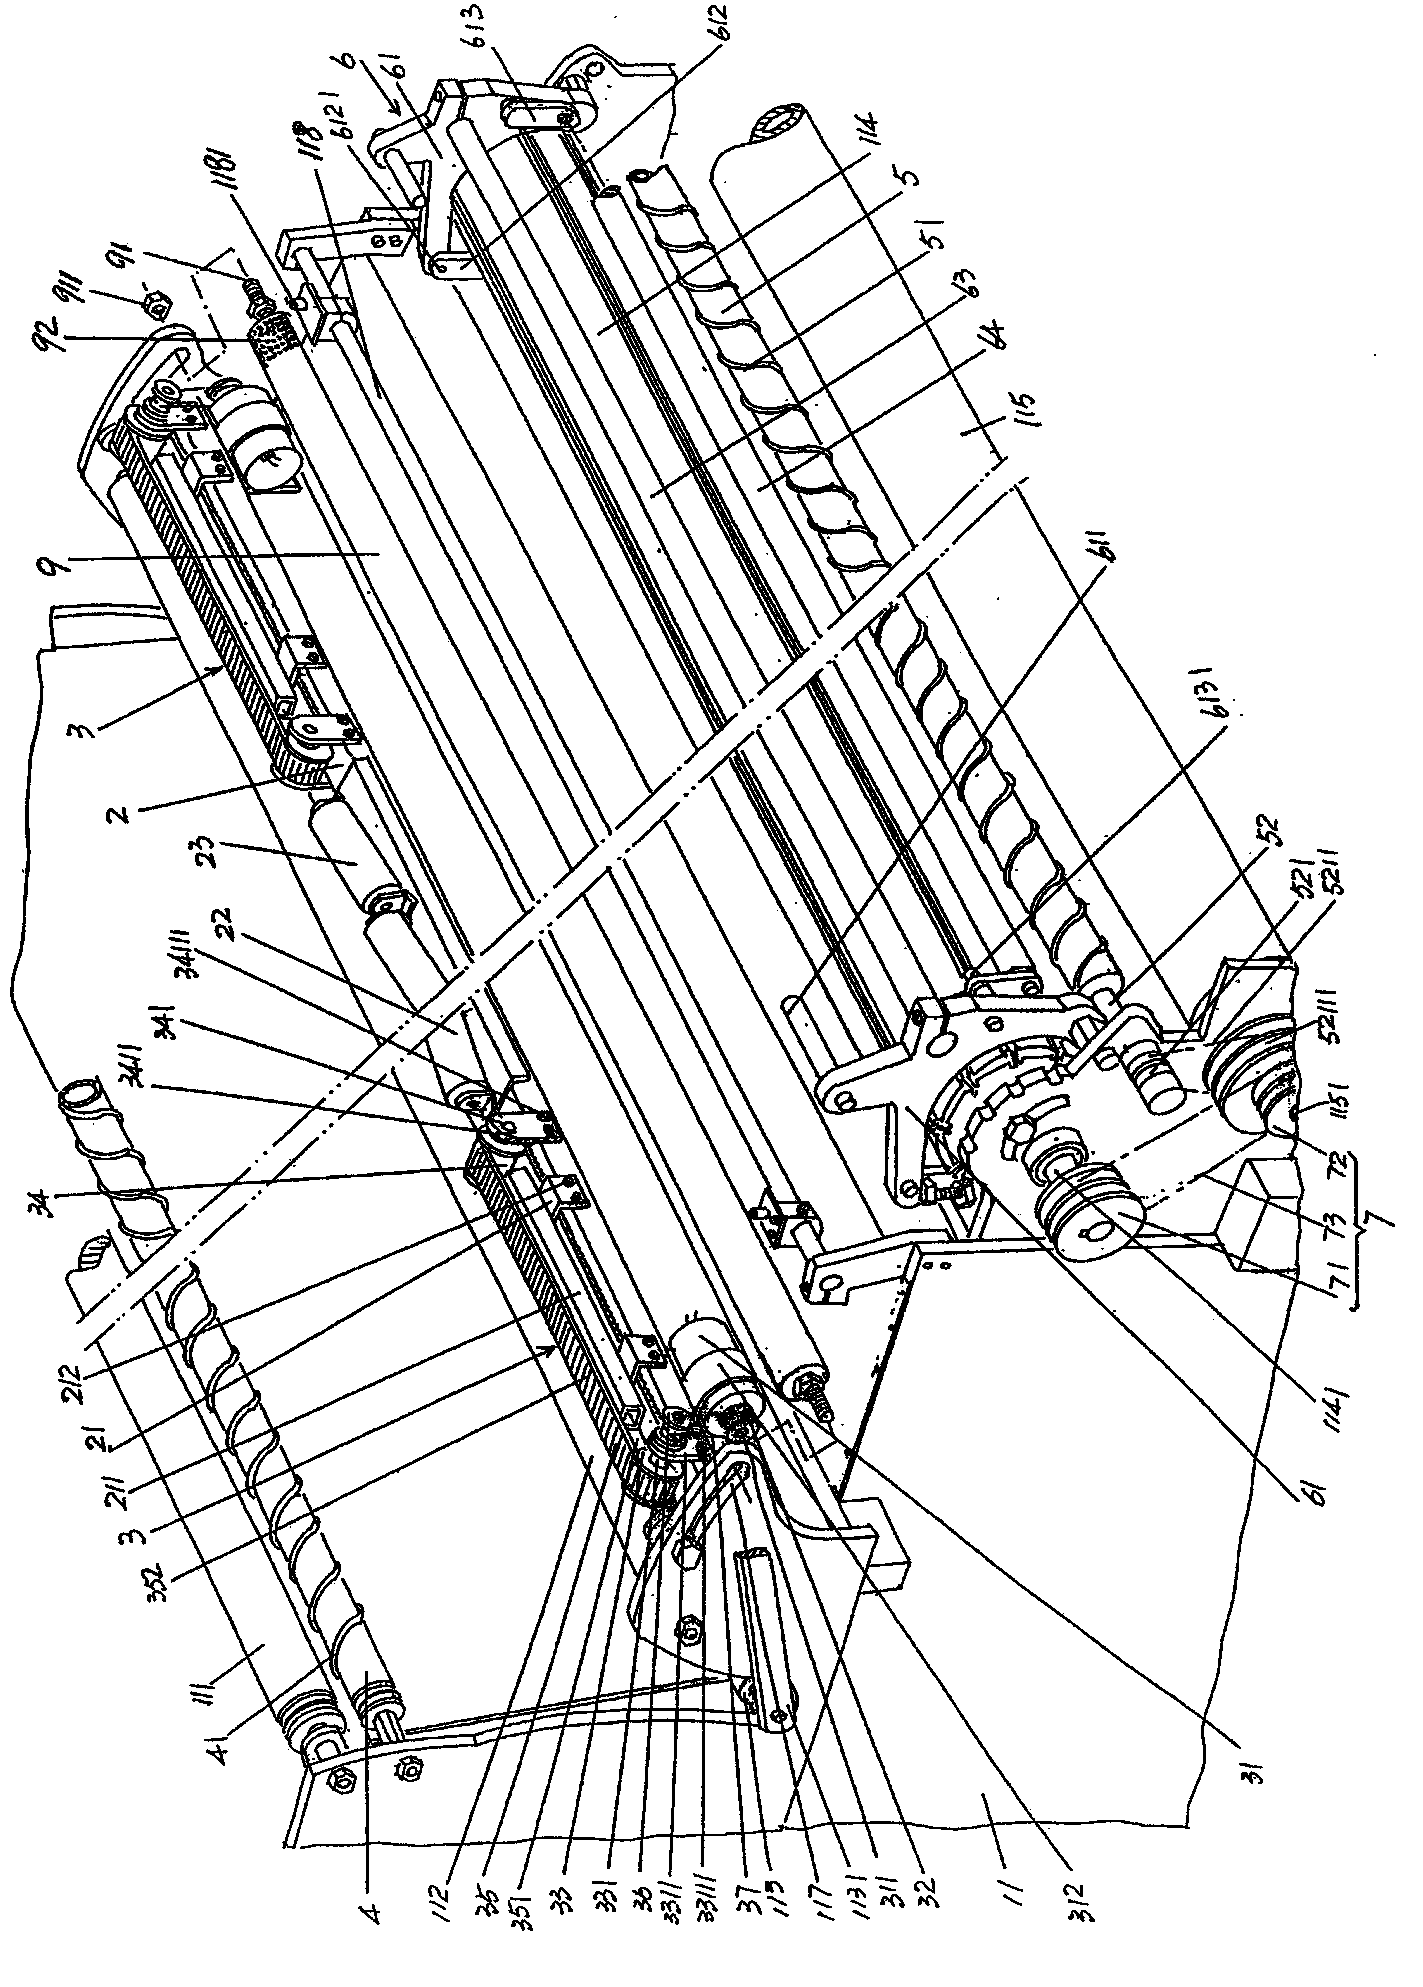 Edge peeling and positioning device of spreading machine